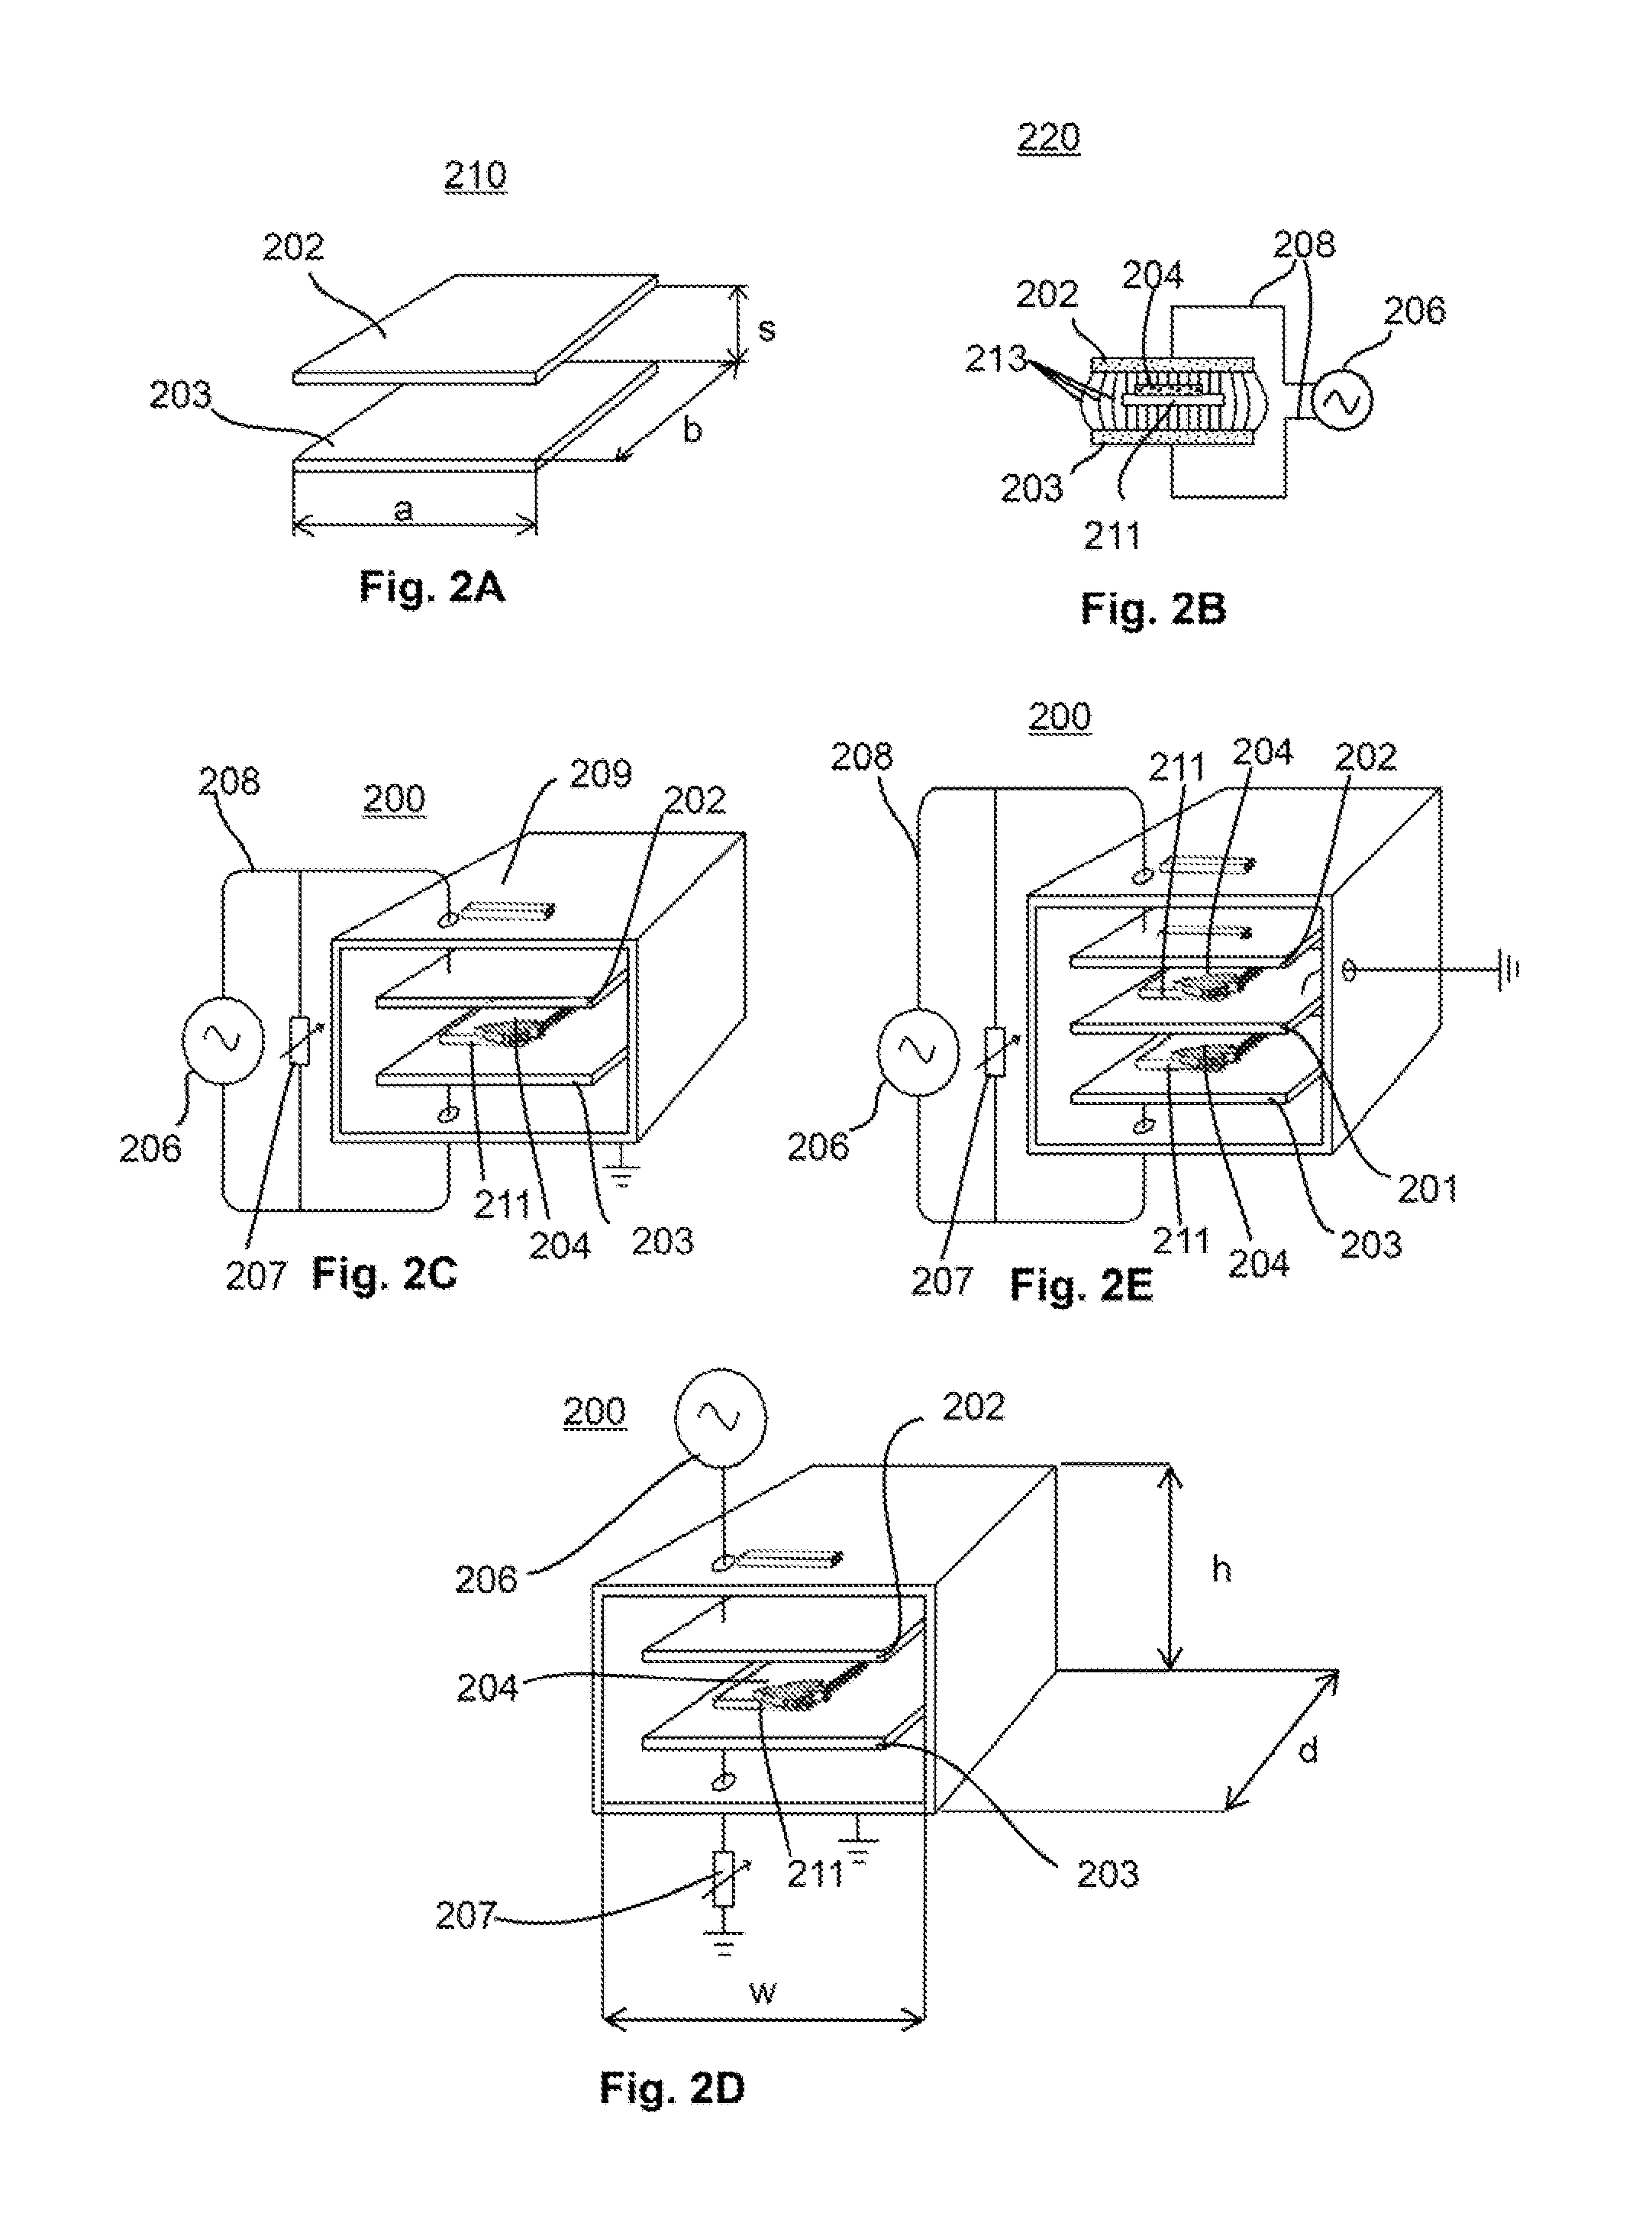 Non-Modal Interplate Microwave Heating System and Method of Heating